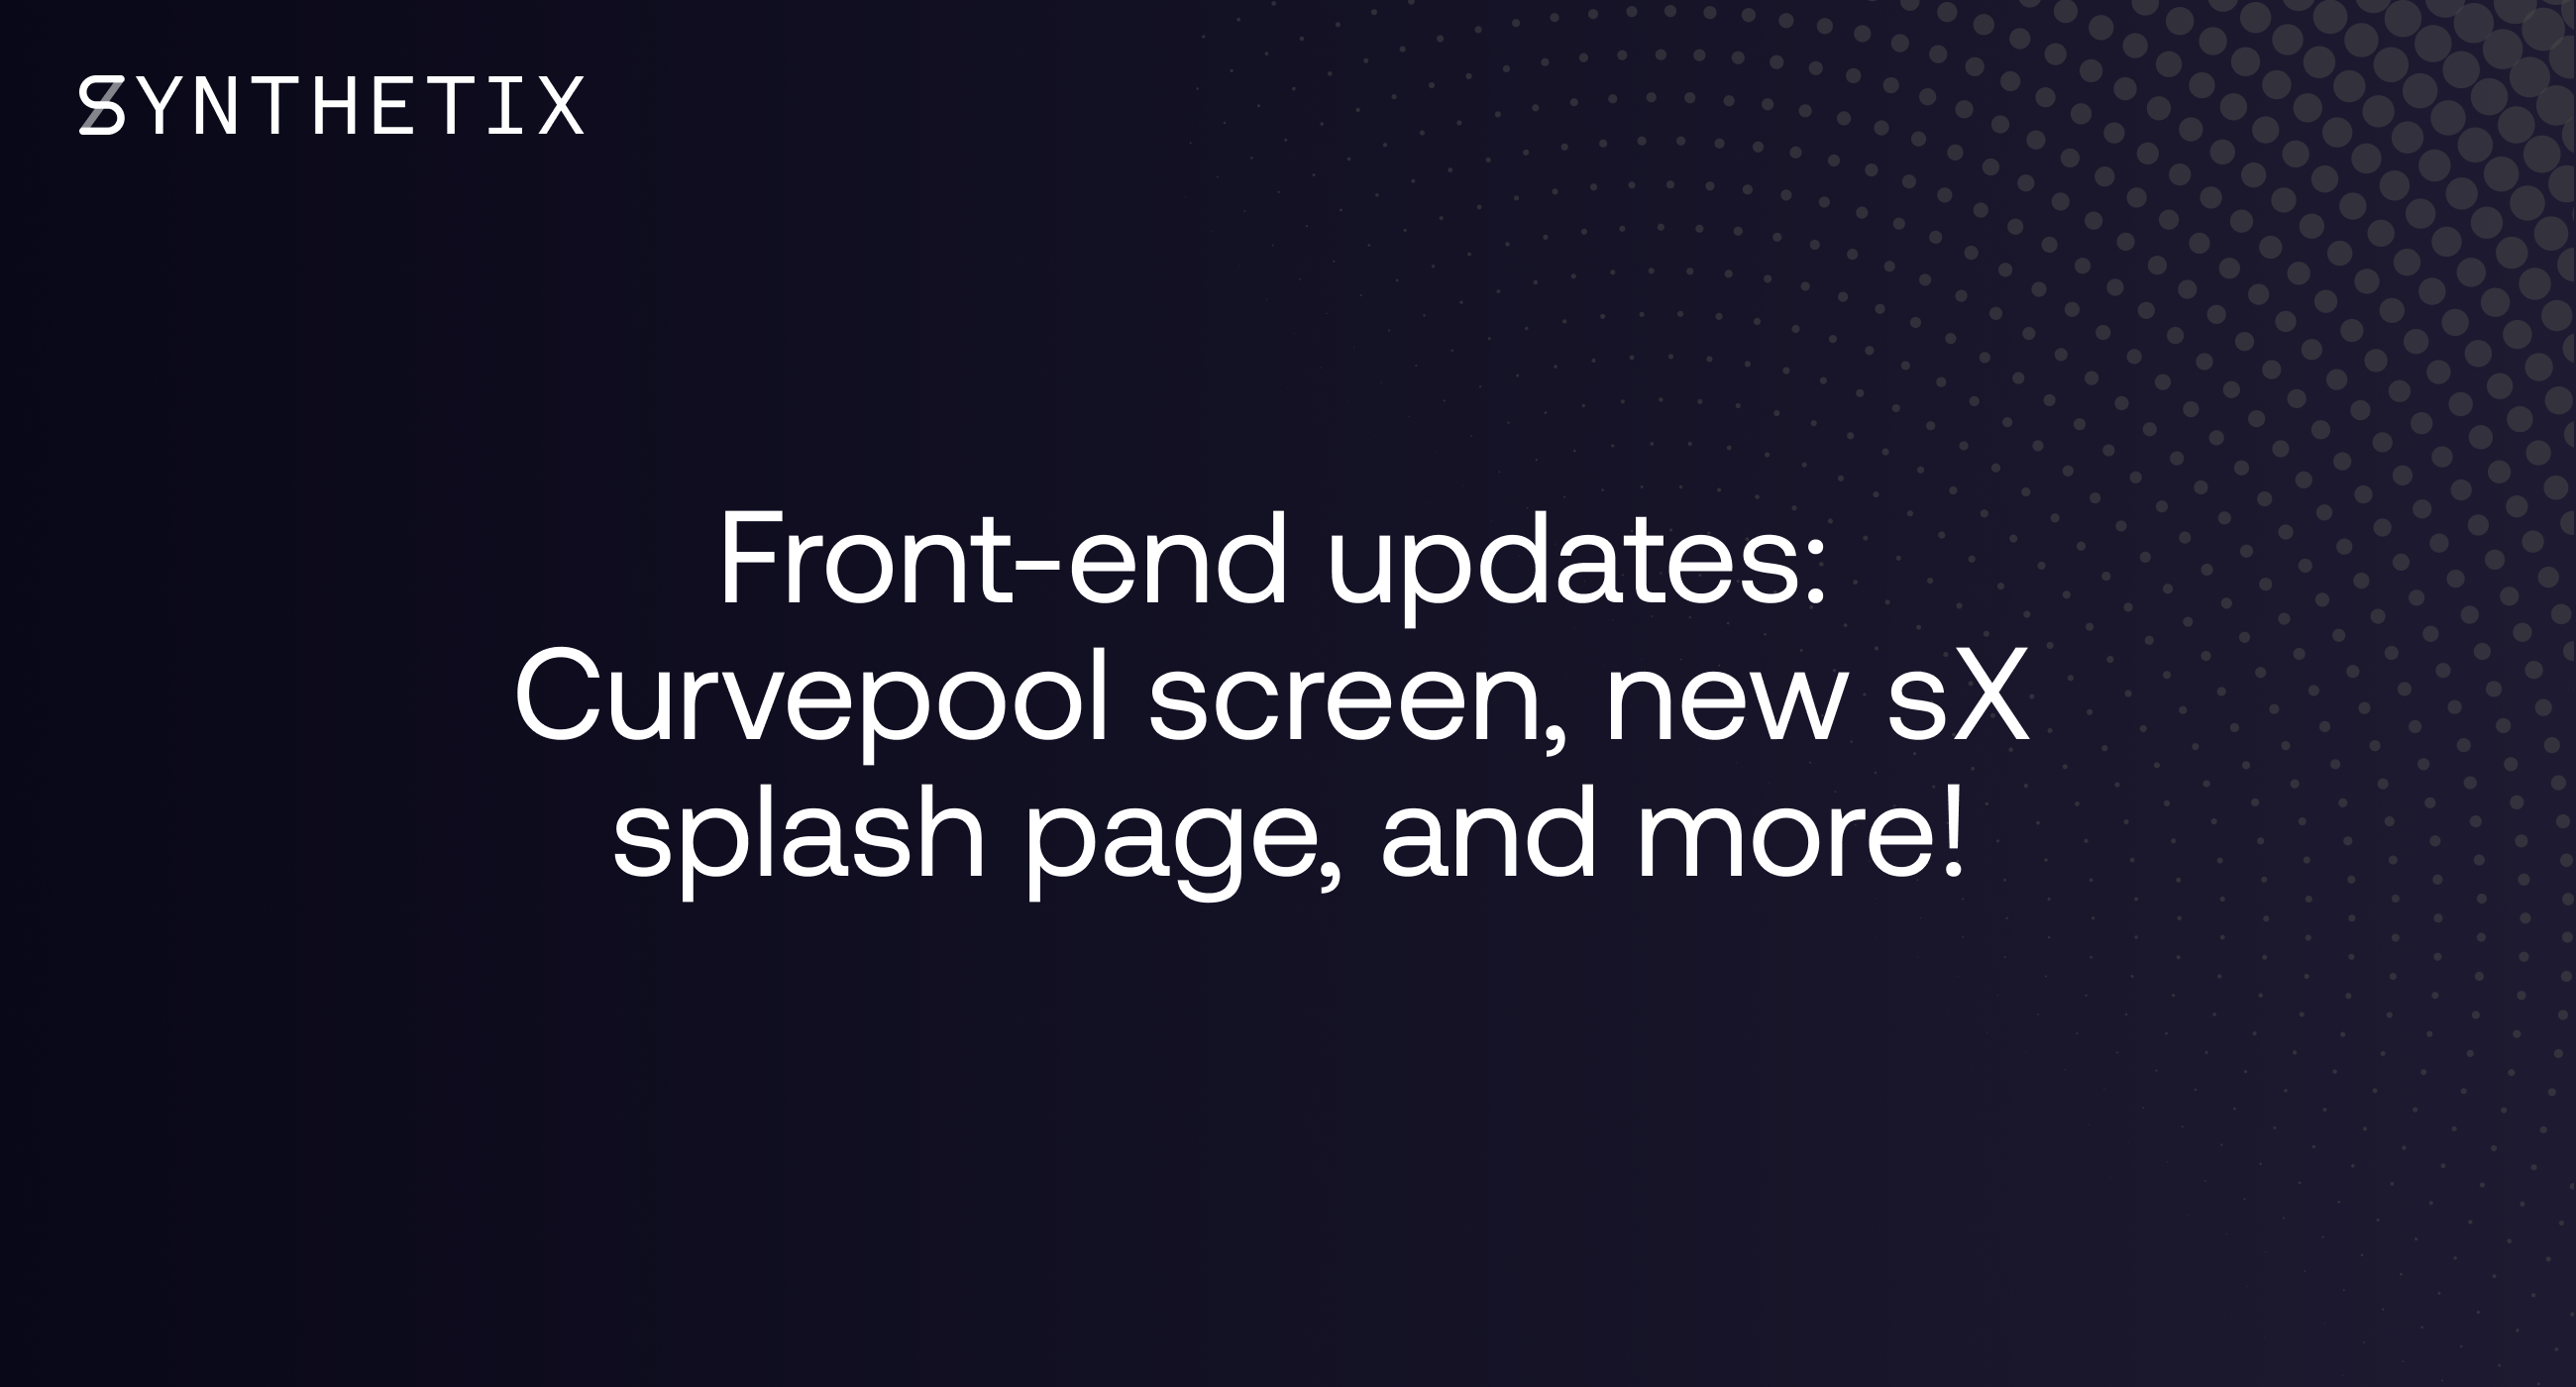 Front-end updates: Curvepool screen, new sX splash page, and more!